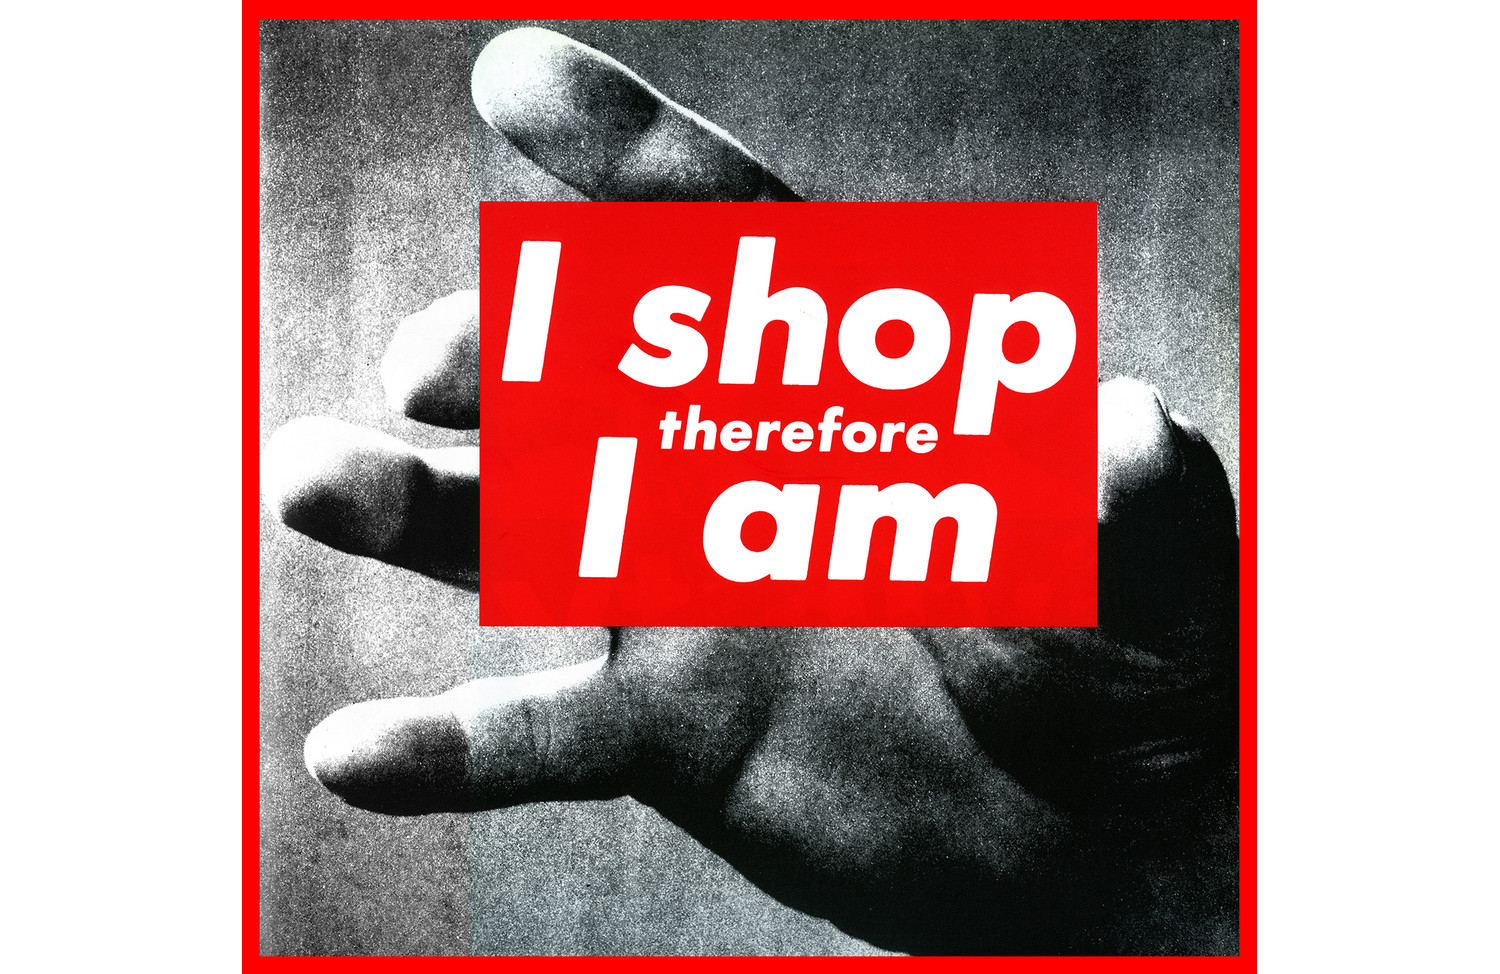 Untitled (I shop therefore I am)